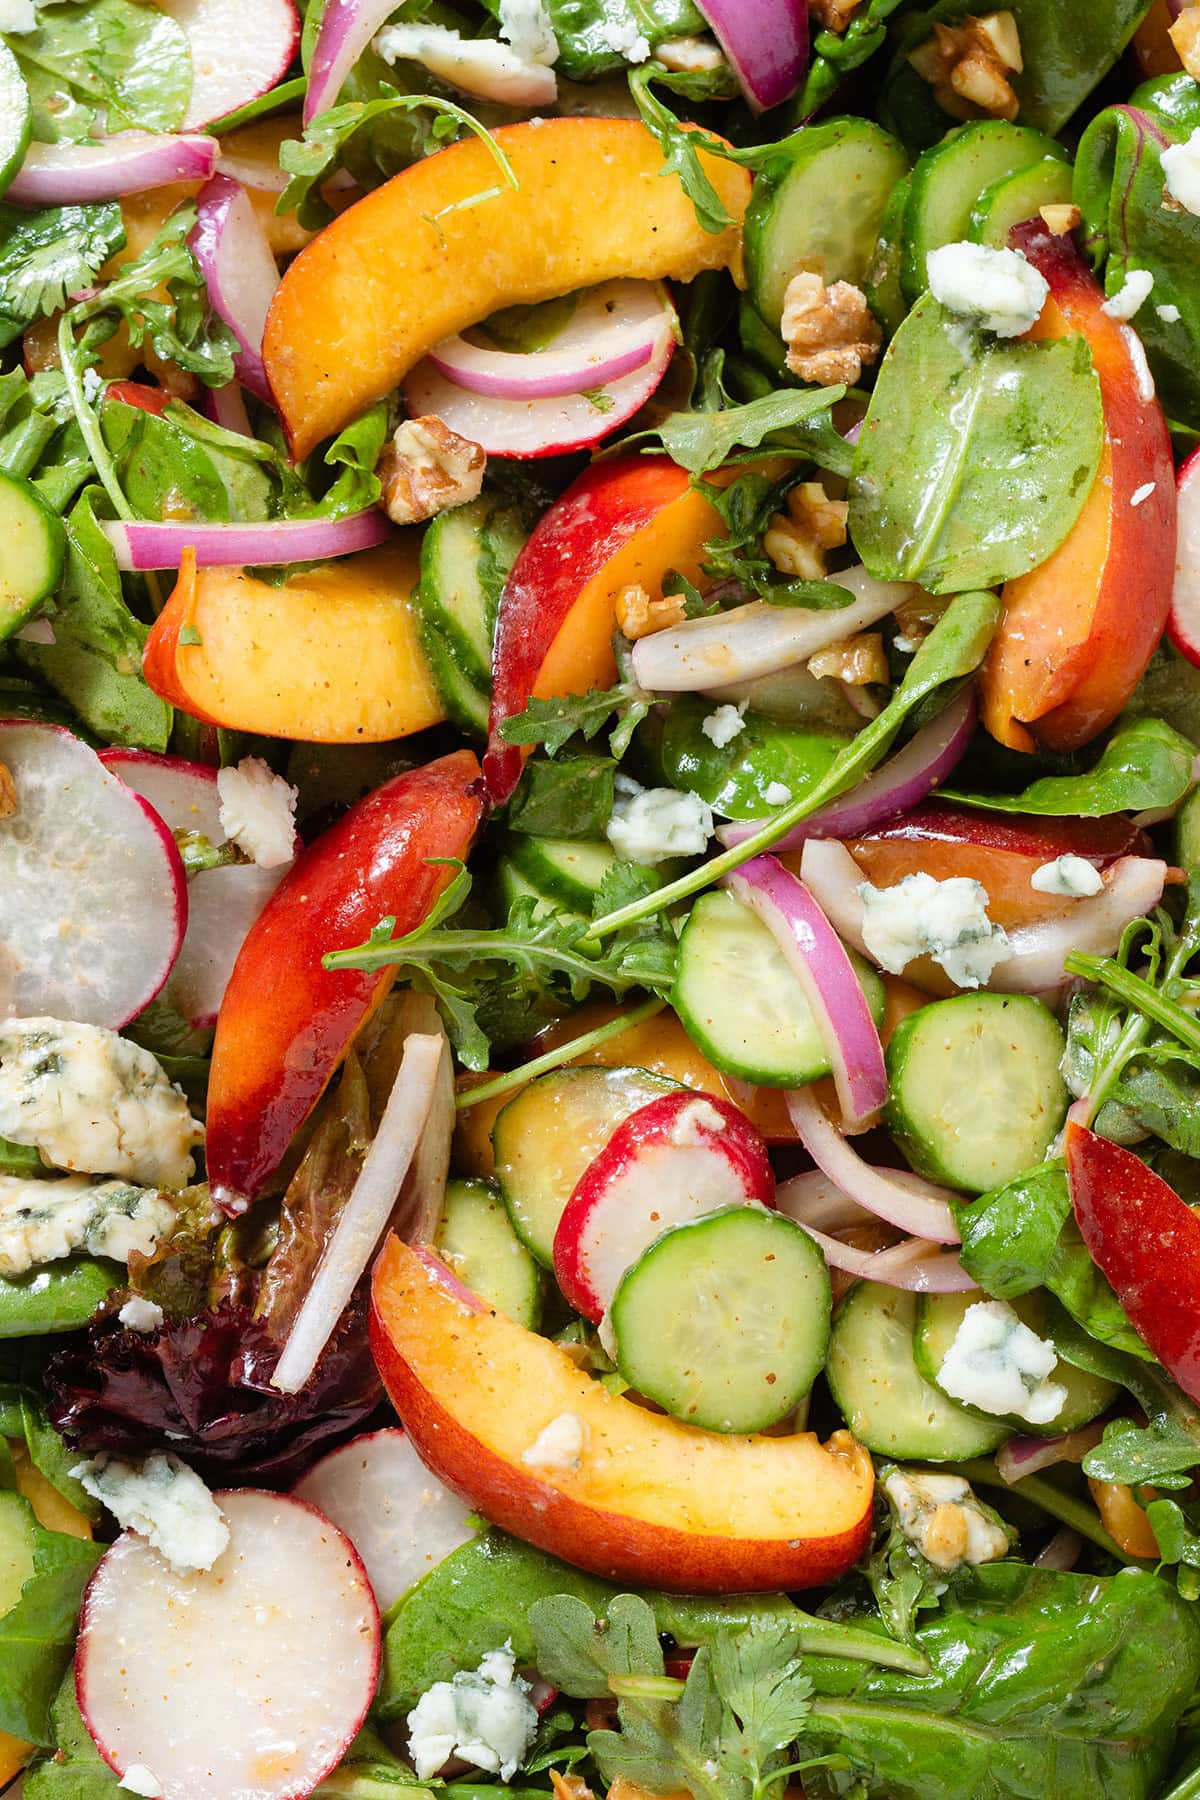 Nectarine salad with mixed greens, red onion, cucumbers, radishes, and blue cheese.